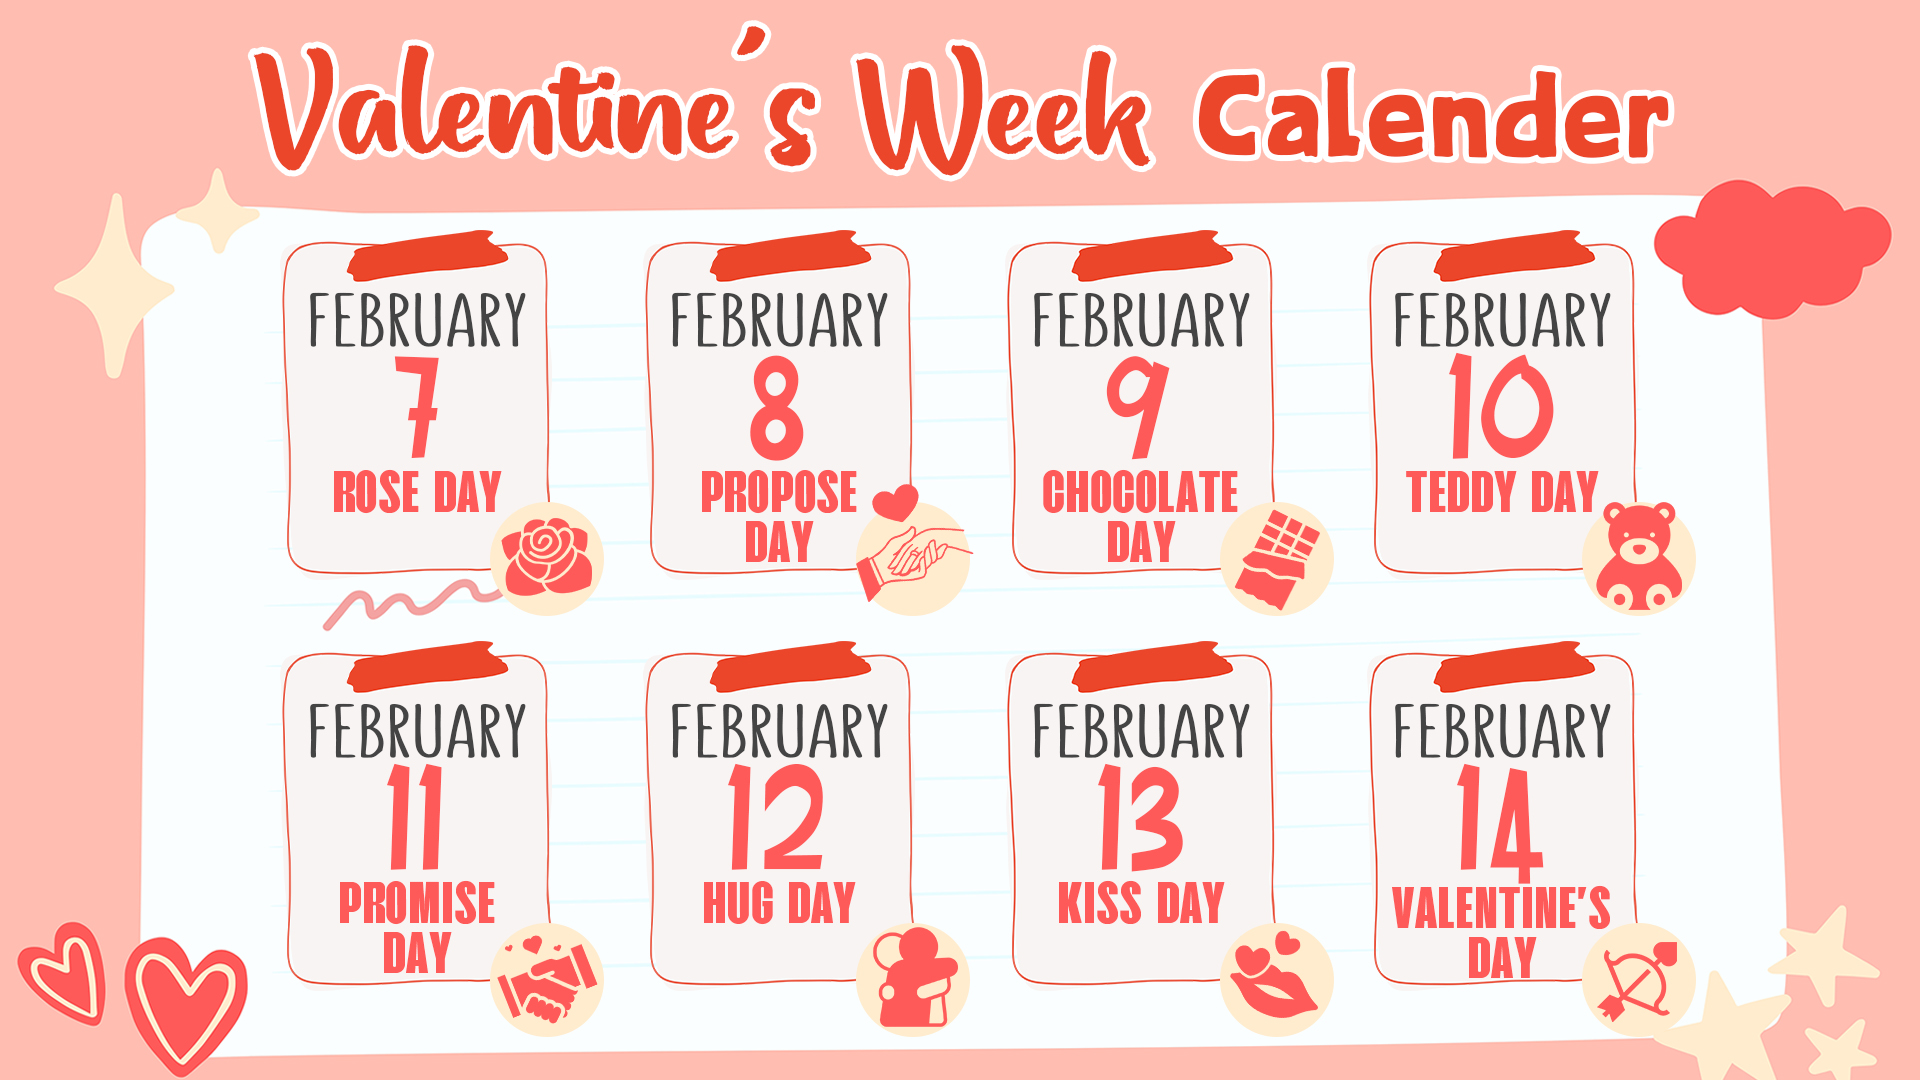 Celebrate Valentine's Week With Ease. Here's a Loveuary calendar to schedule your romance